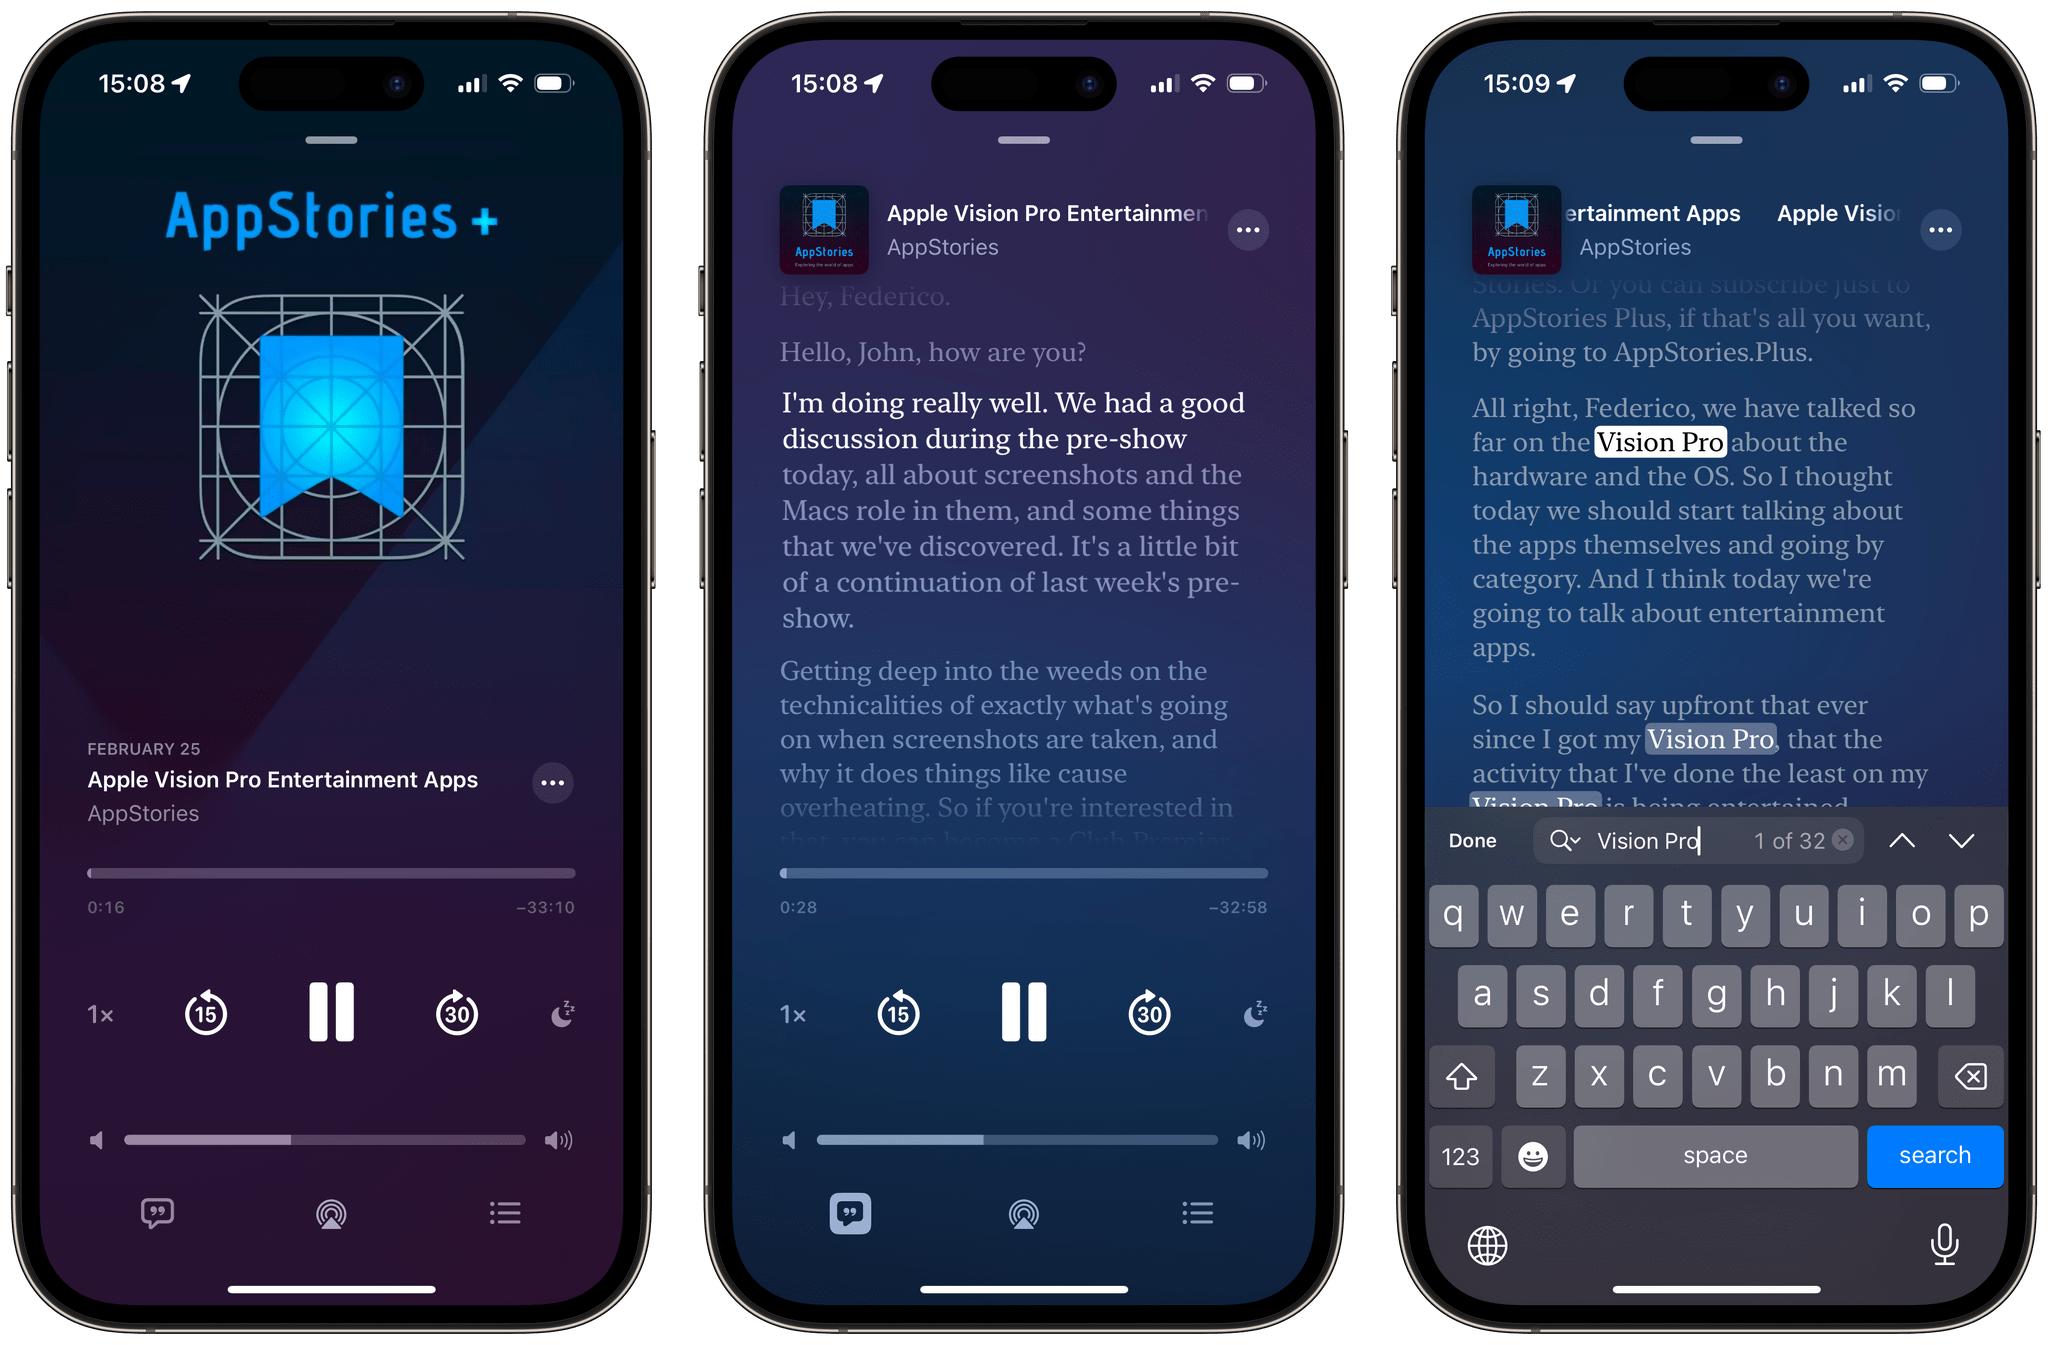 Podcasts transcripts highlight in sync with the audio, and can be searched directly from the Now Playing screen.